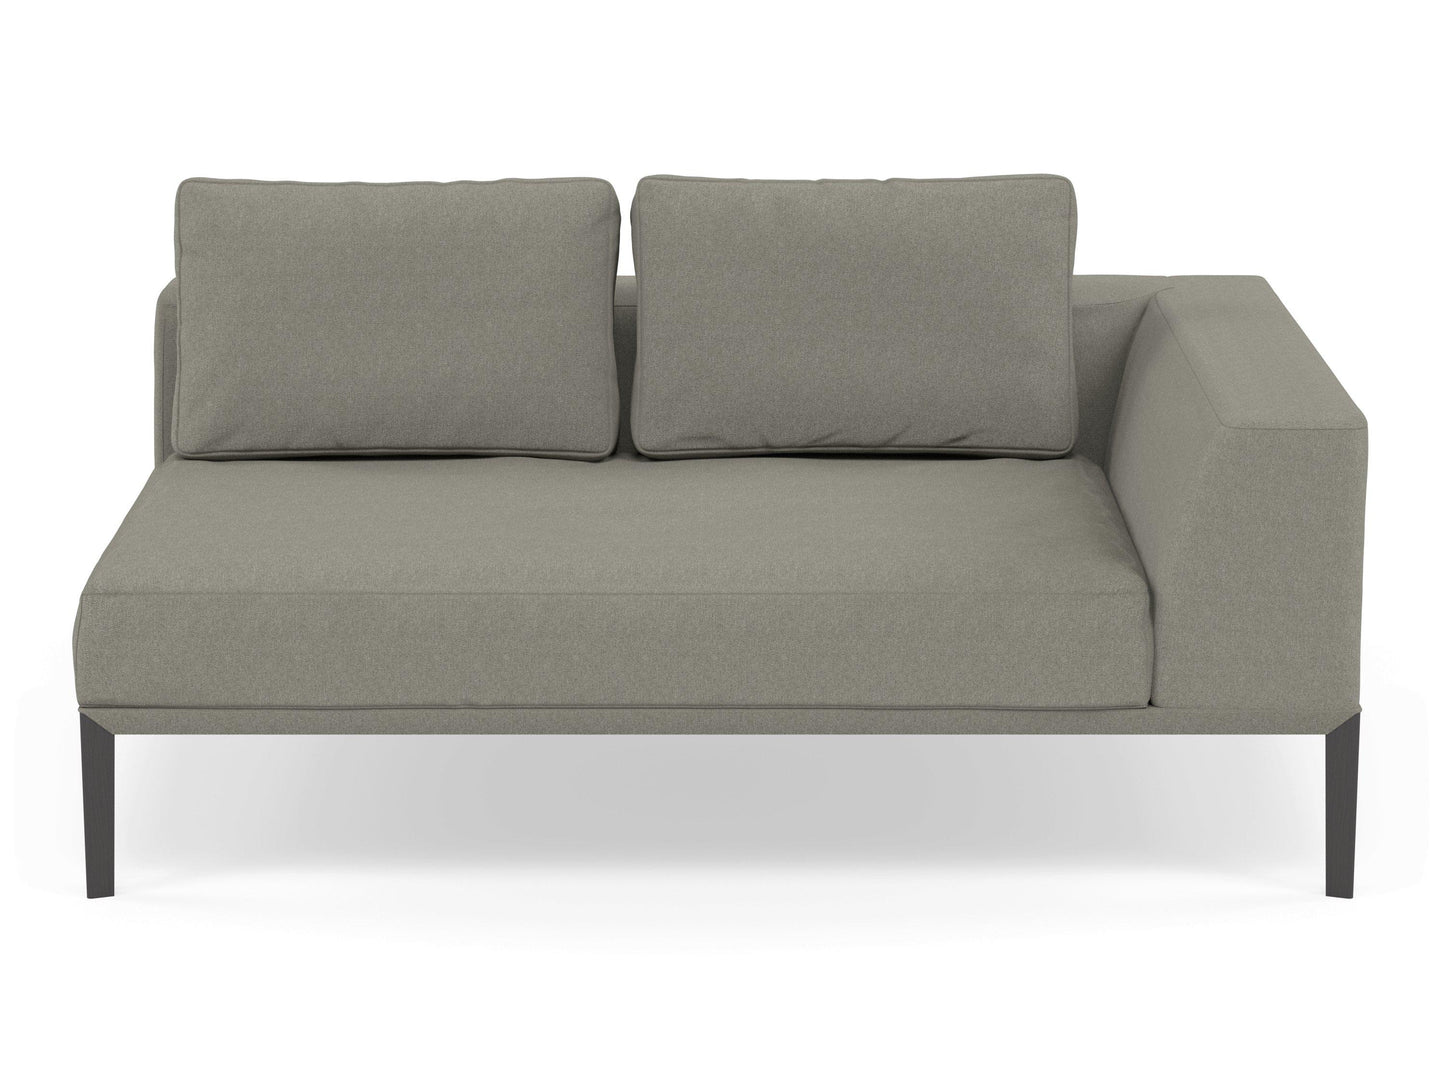 Modern 2 Seater Chaise Lounge Style Sofa with Left Armrest in Silver Grey Fabric-Wenge Oak-Distinct Designs (London) Ltd